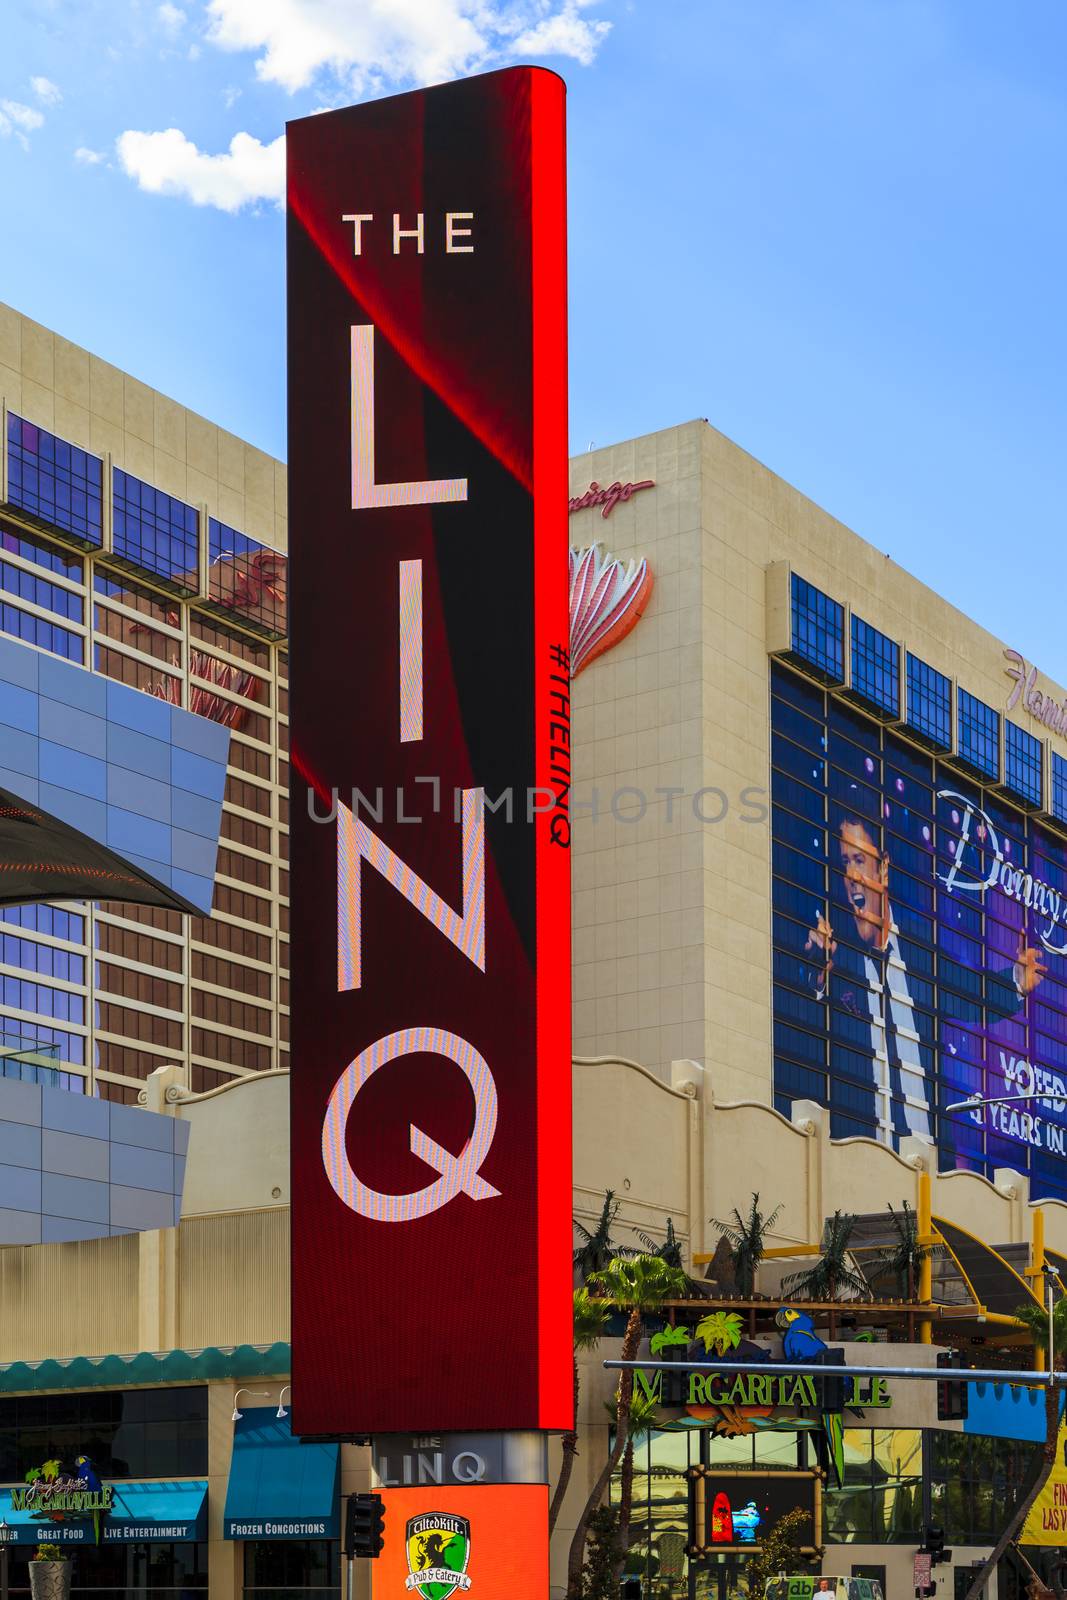 LAS VEGAS - JULY 7, 2015 -The LINQ Sign in Las Vegas. The LINQ is the open-air shopping and dining area leading up to The High Roller Wheel the world's largest observation wheel.